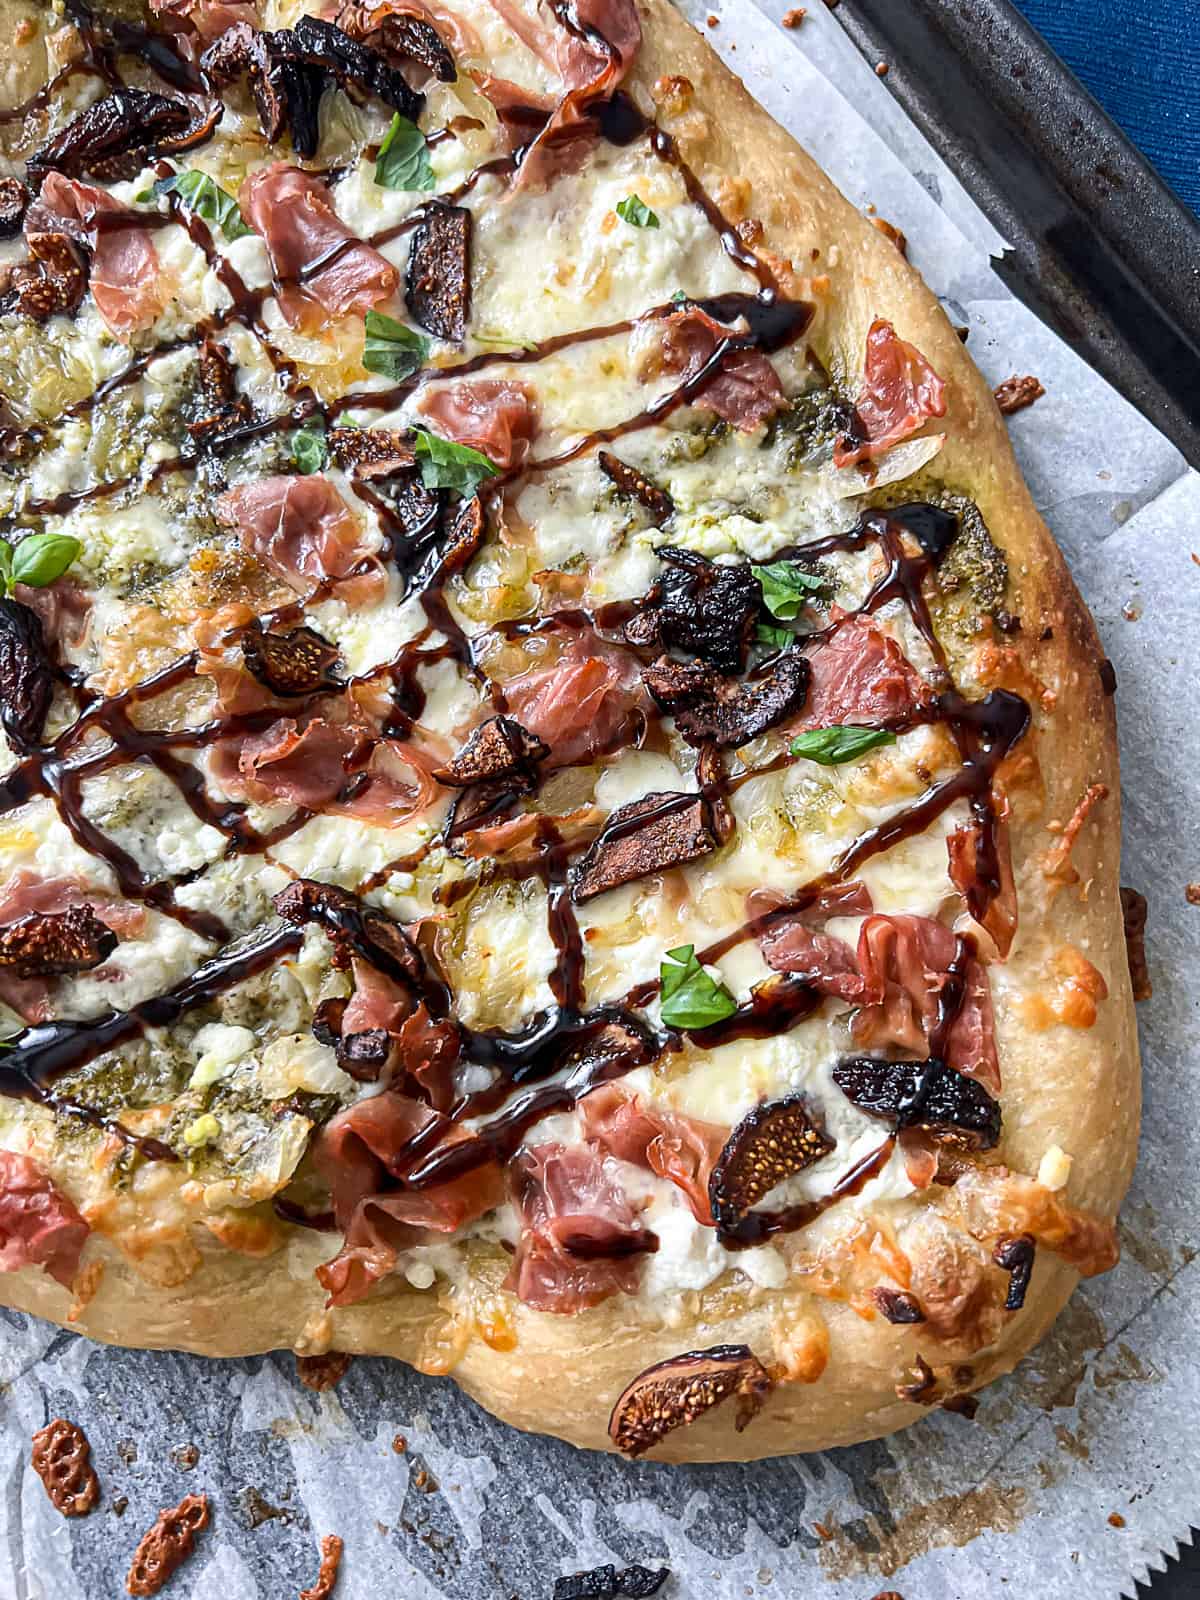 Balsamic glaze topping on pizza with figs and prosciutto and goat cheese